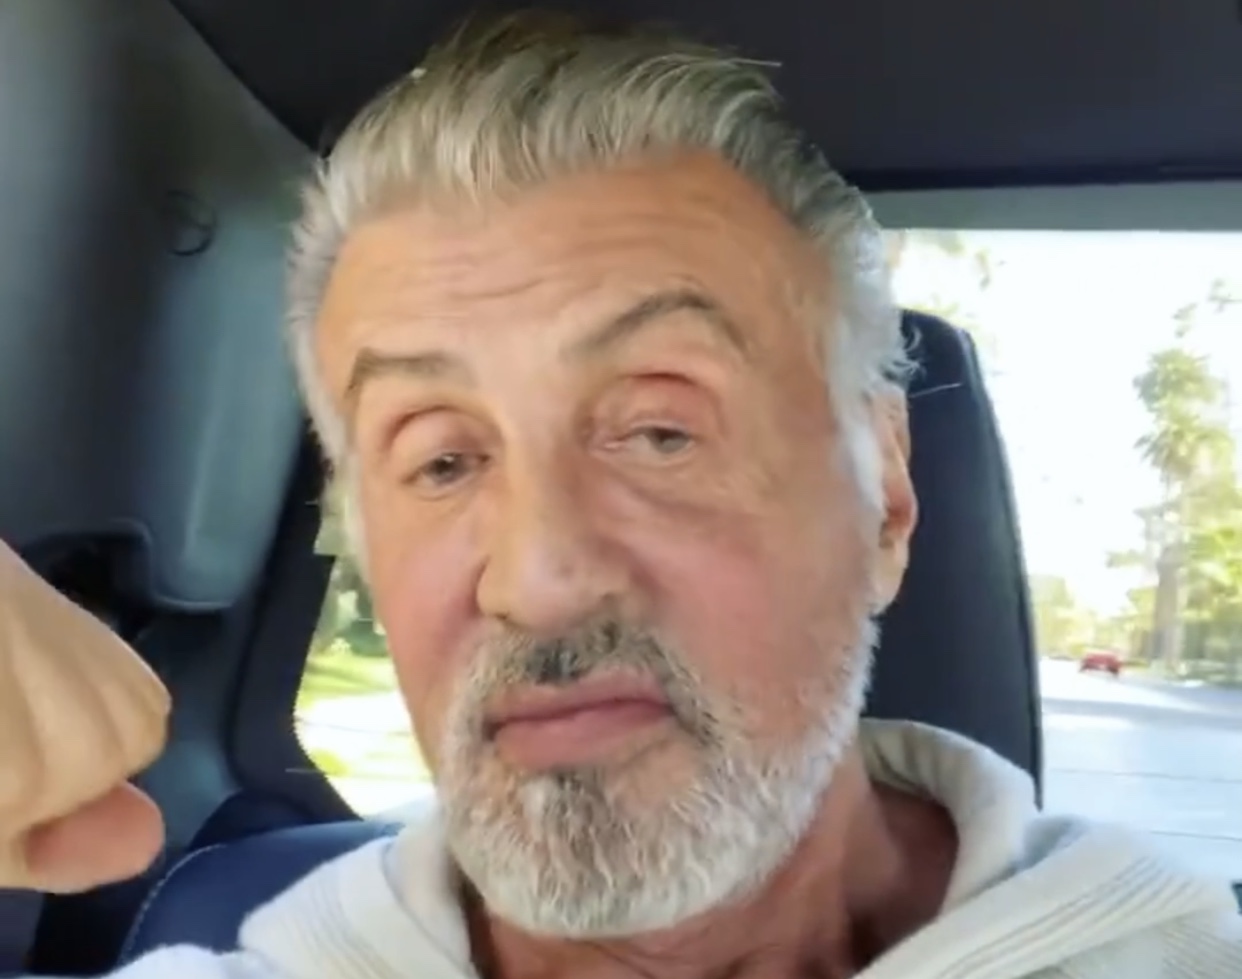 Sylvester Stallone reveals natural silver hair 'Stay true to the gray!'